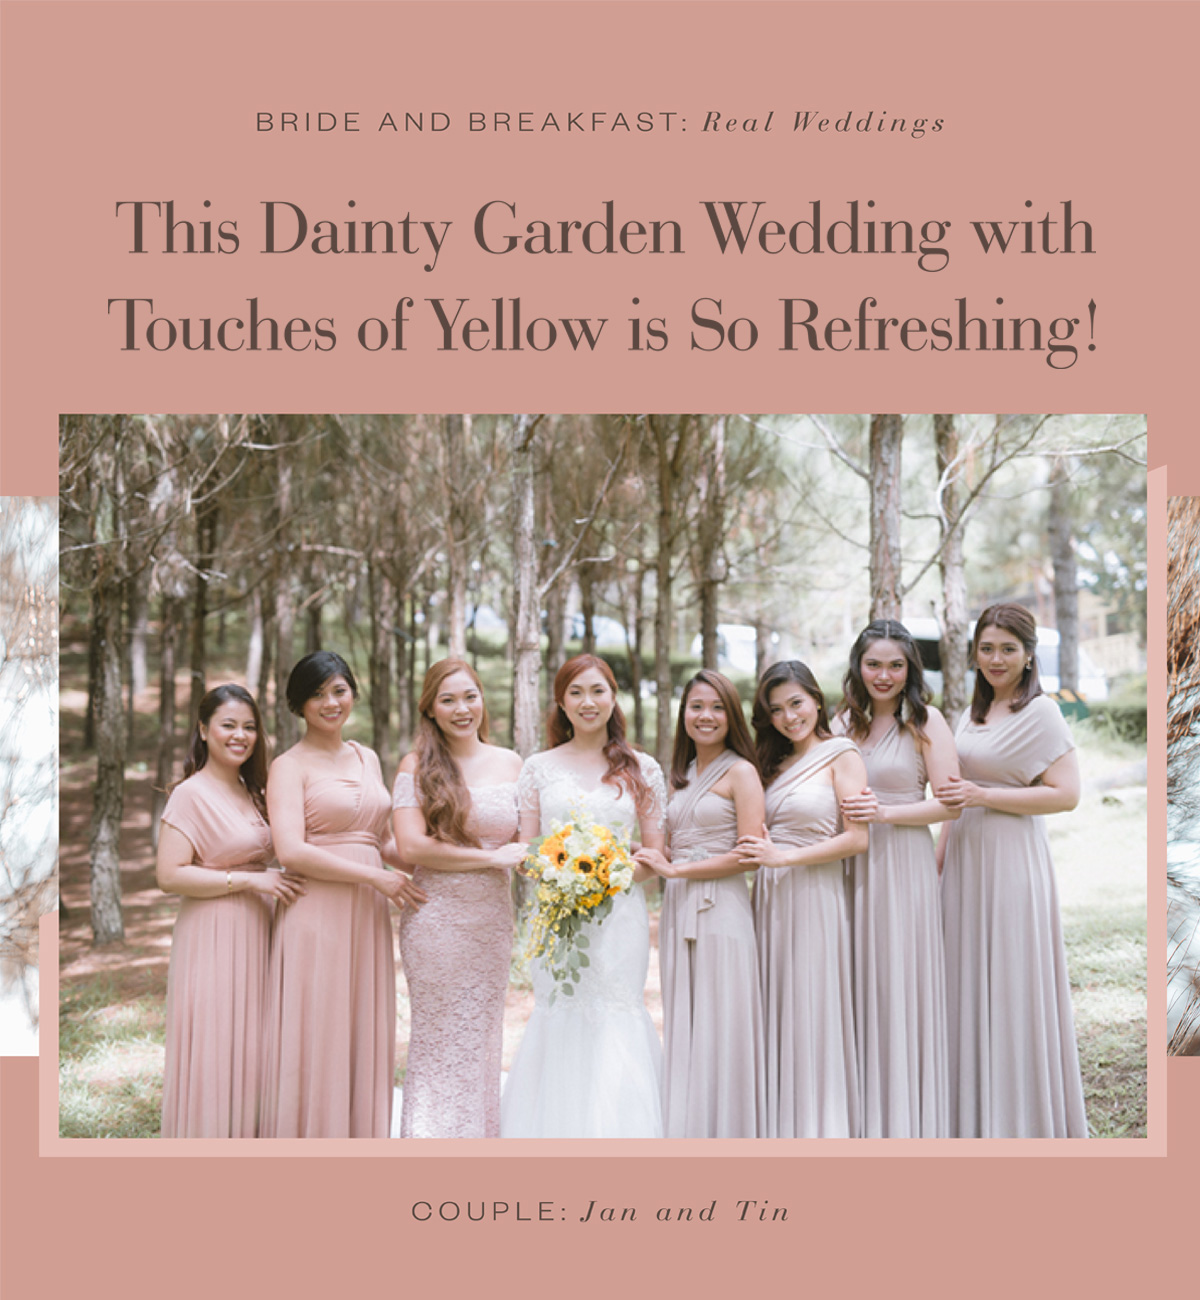 This dainty garden wedding with touches of yellow is so refreshing